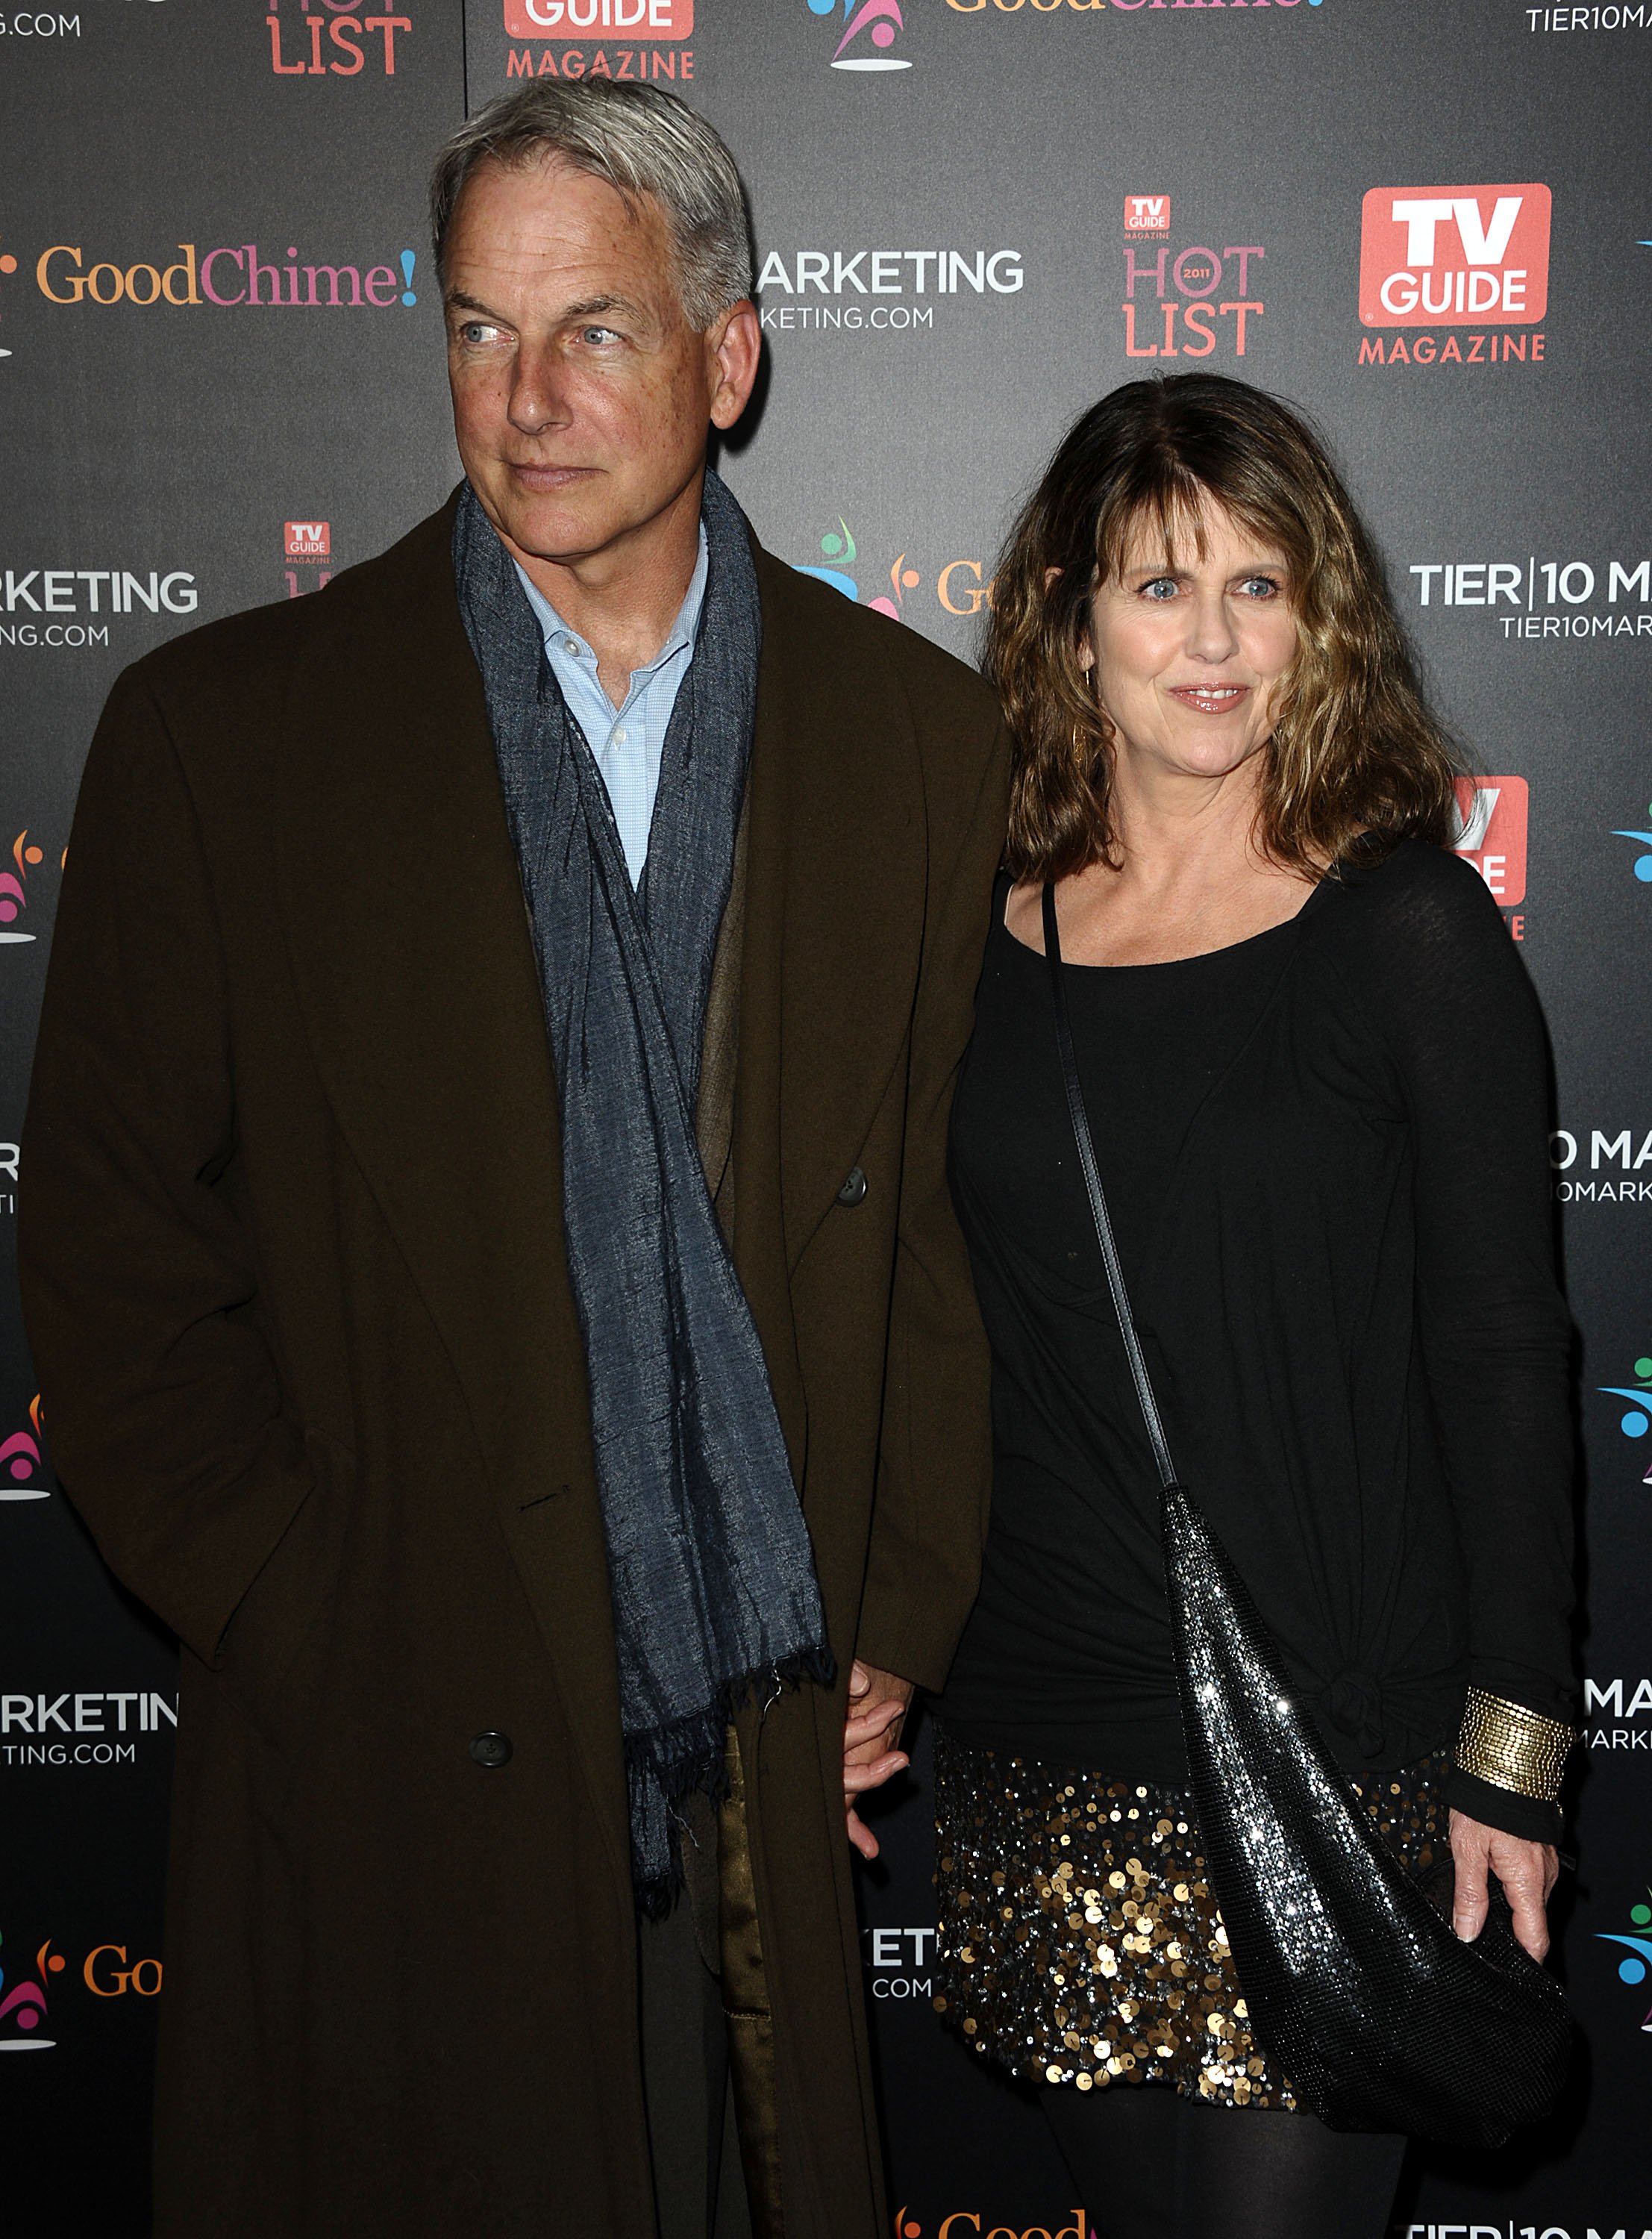 Actor Mark Harmon and actress Pam Dawber during the 2011 TV Guide Magazine Hot List Party at Greystone Manor Supperclub on November 7, 2011 in West Hollywood, California. | Source: Getty Images